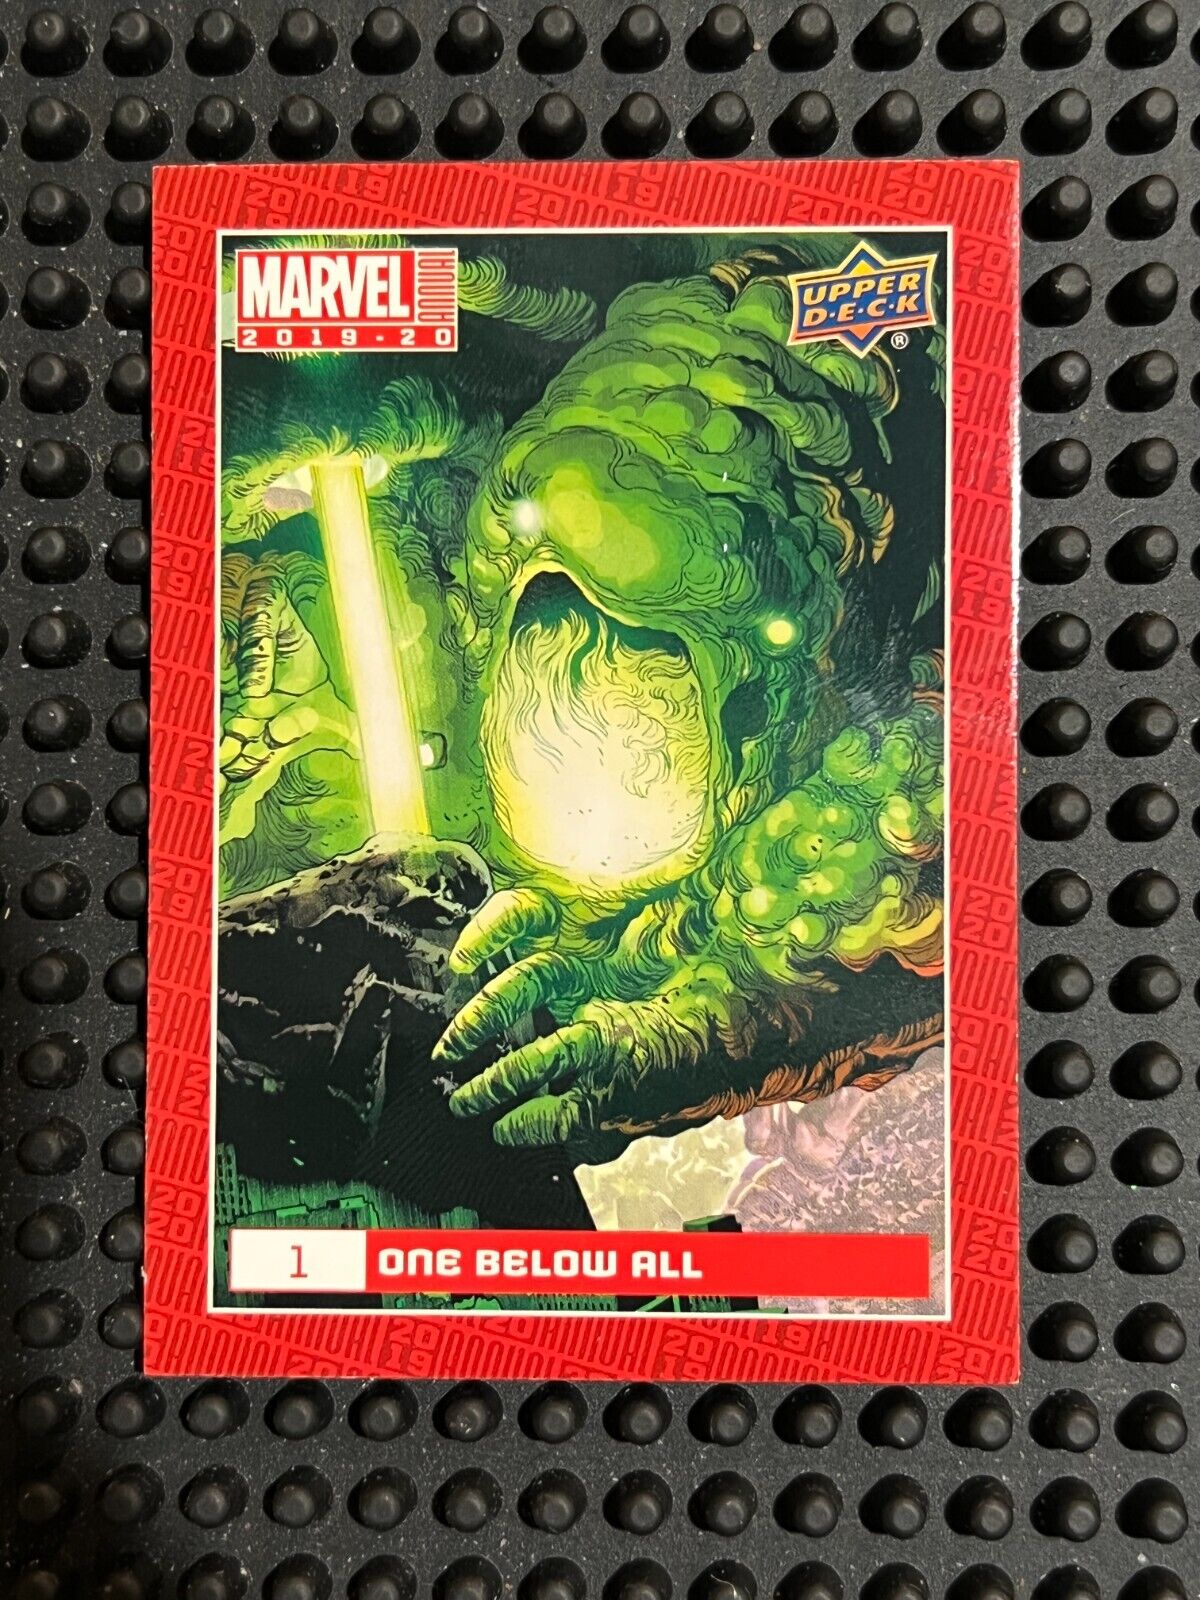 2019-20 Marvel Annual UPPER DECK Trading Cards Complete Your Set U PICK COMIC